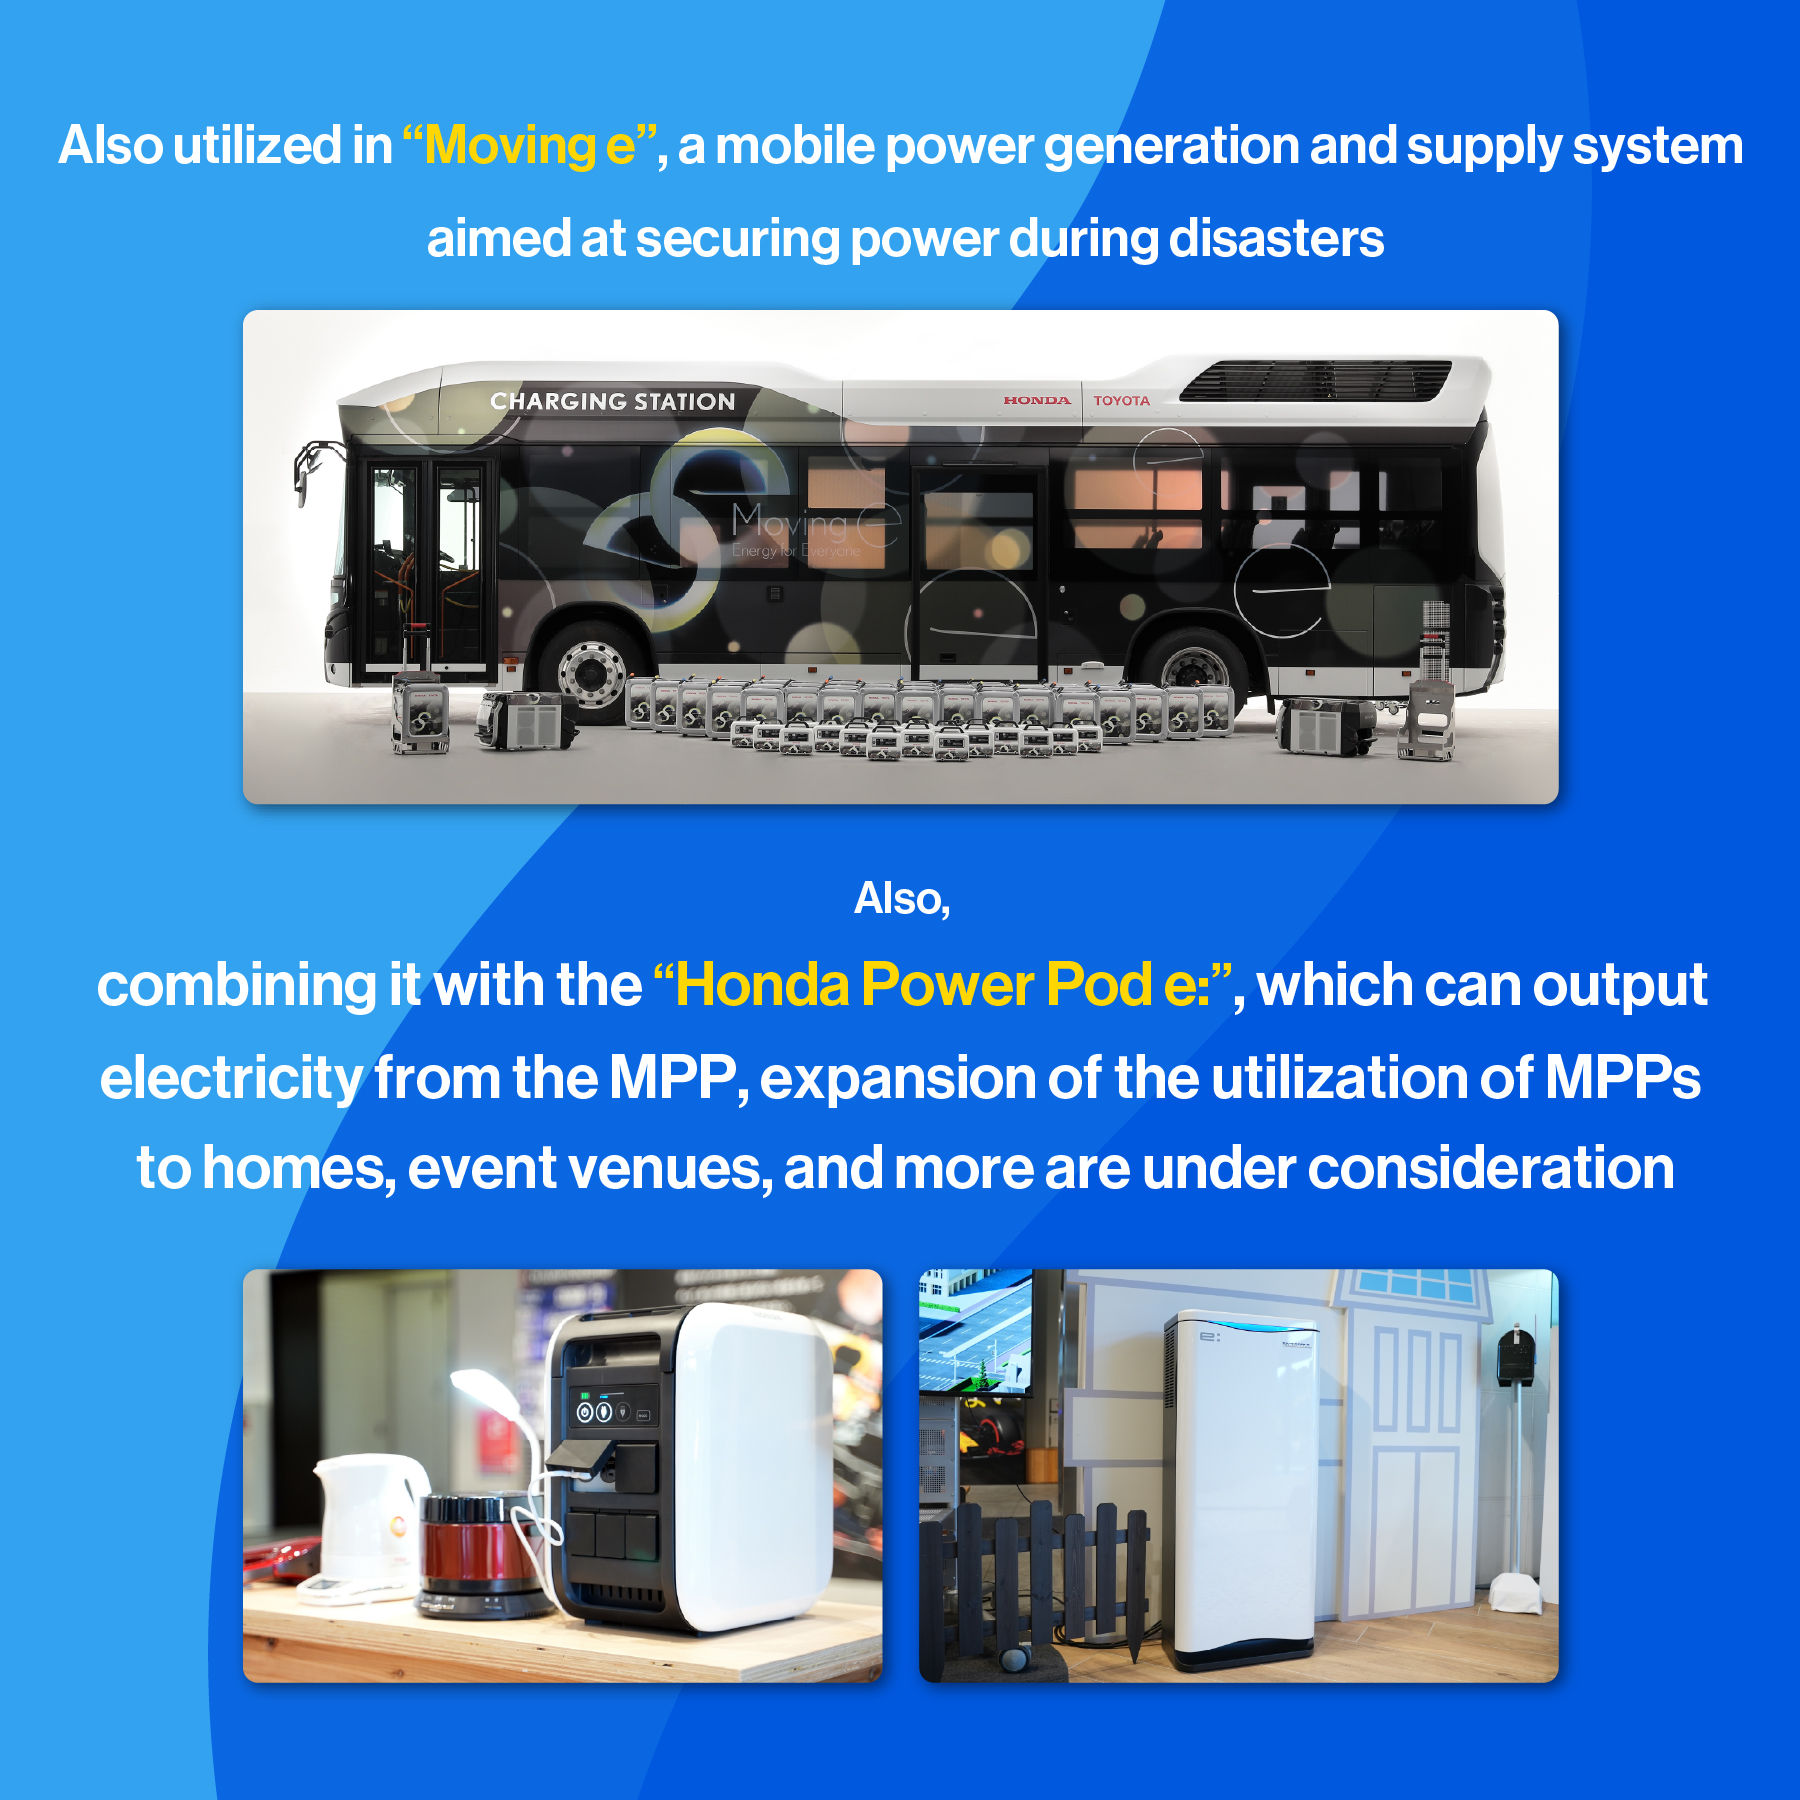 Expanding the utilization of the Mobile Power Pack through &quot;Moving e&quot; and &quot;Honda Power Pod e:&quot;